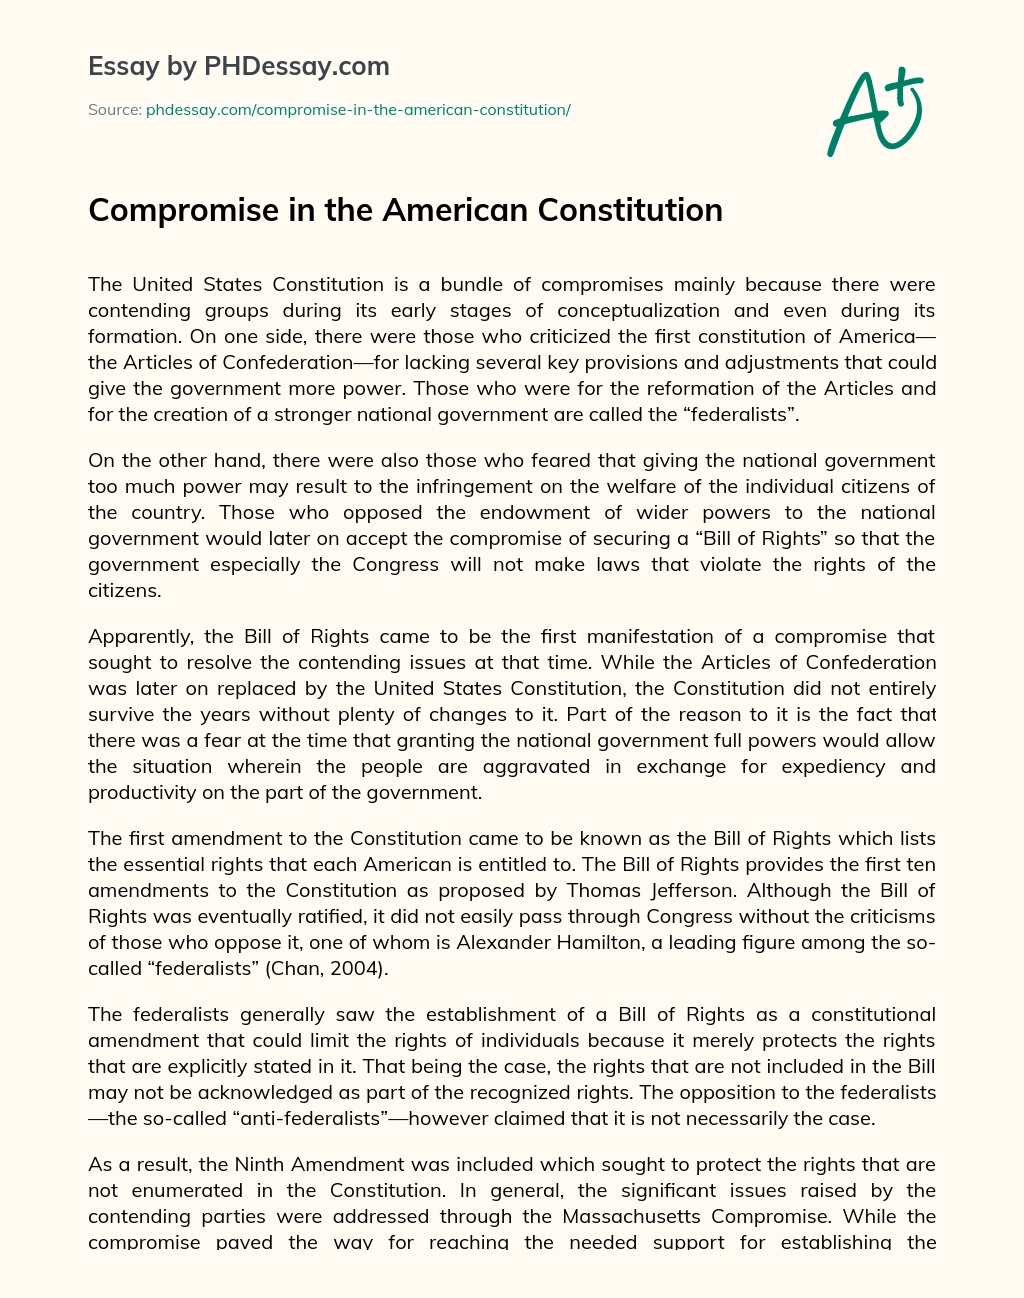 Compromise in the American Constitution essay